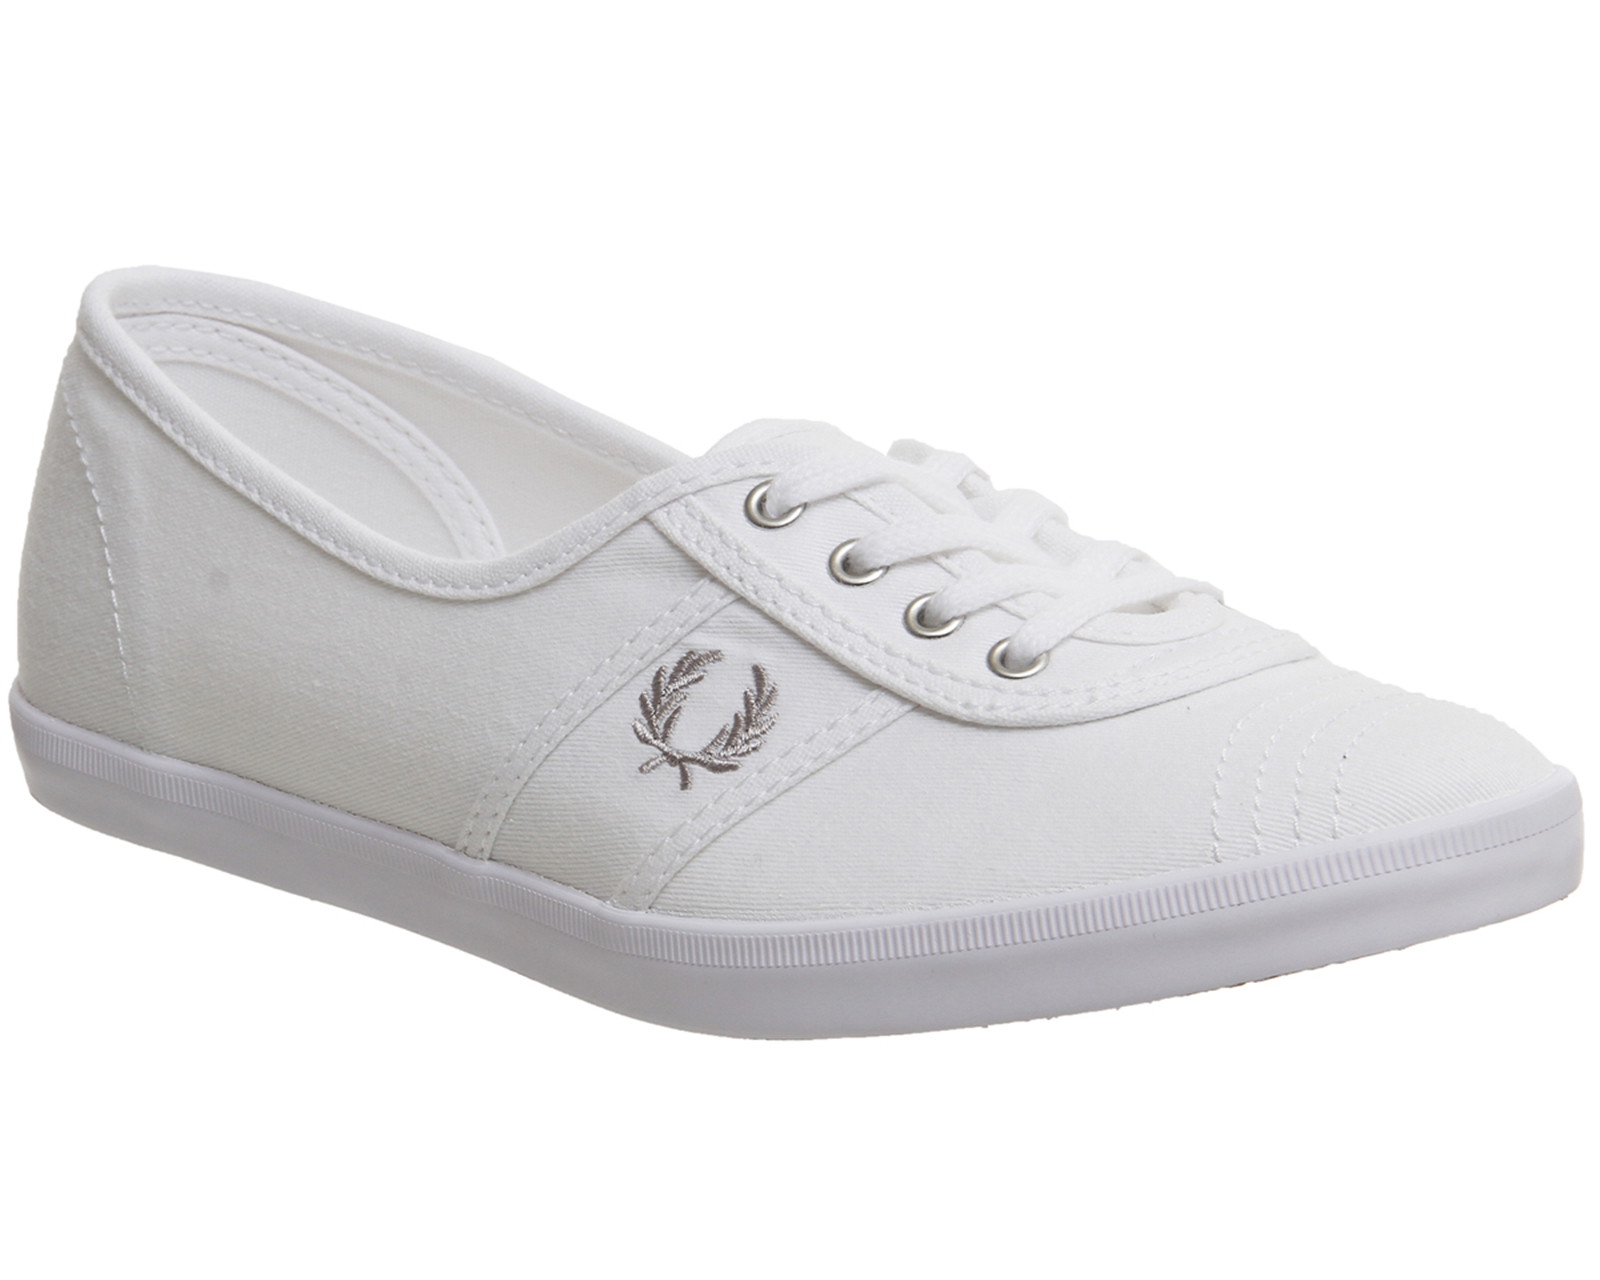 Fred Perry Plimsolls Ladies Hotsell, SAVE 53% - lutheranems.com